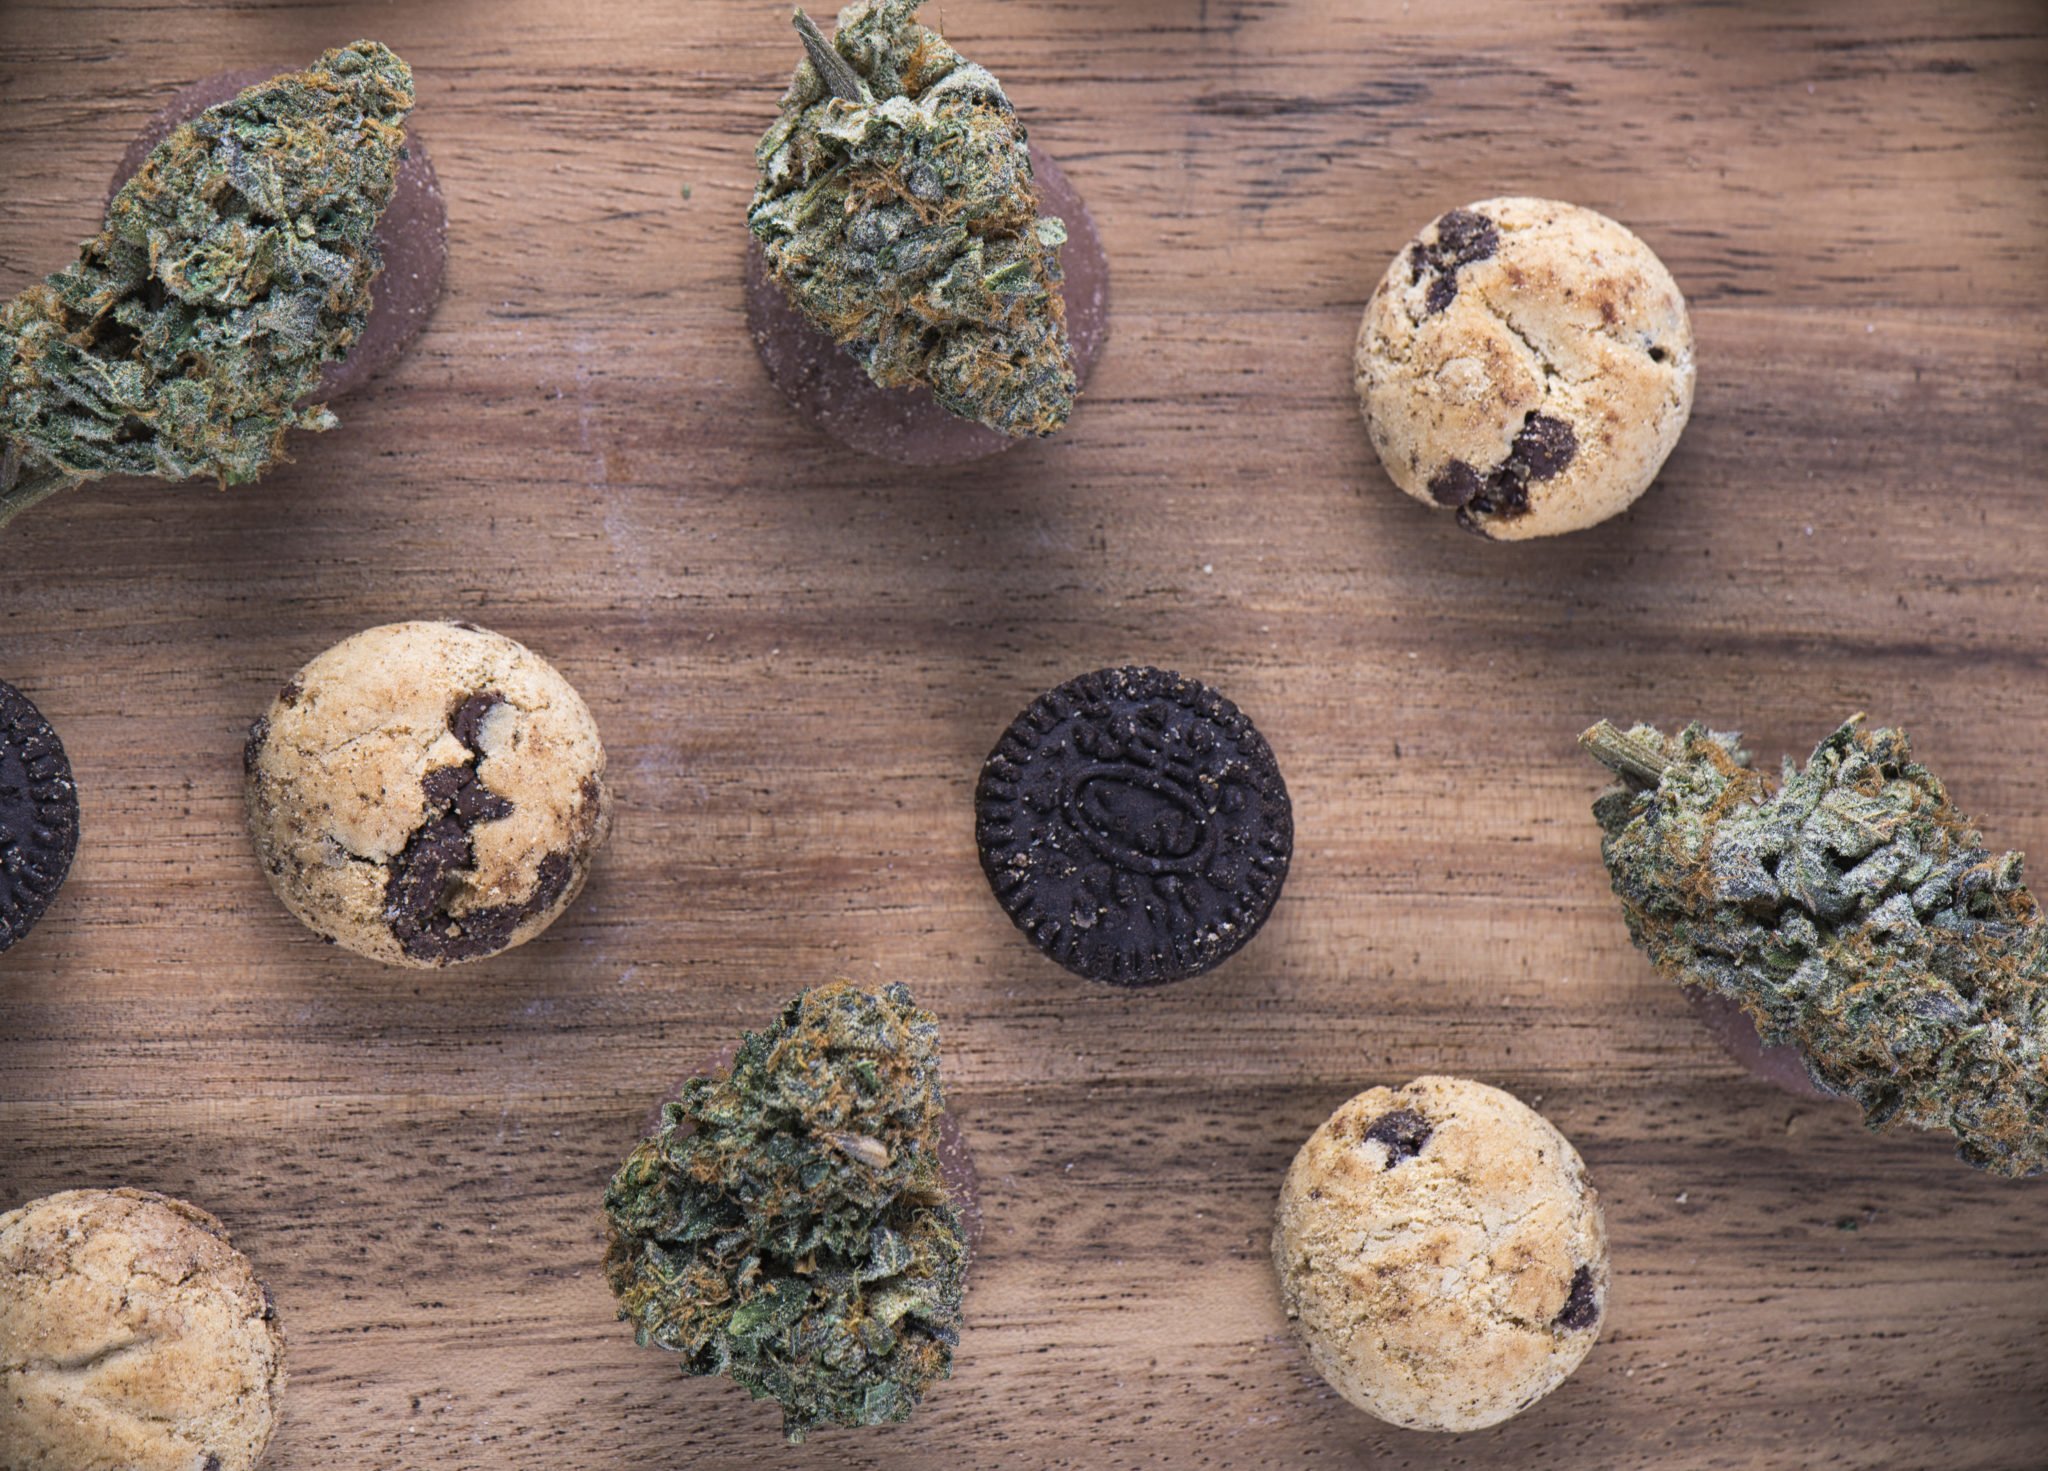 Background with cannabis nugs (forum cut cookies strain) over infused chocolate chips cookies - medical marijuana edibles concept